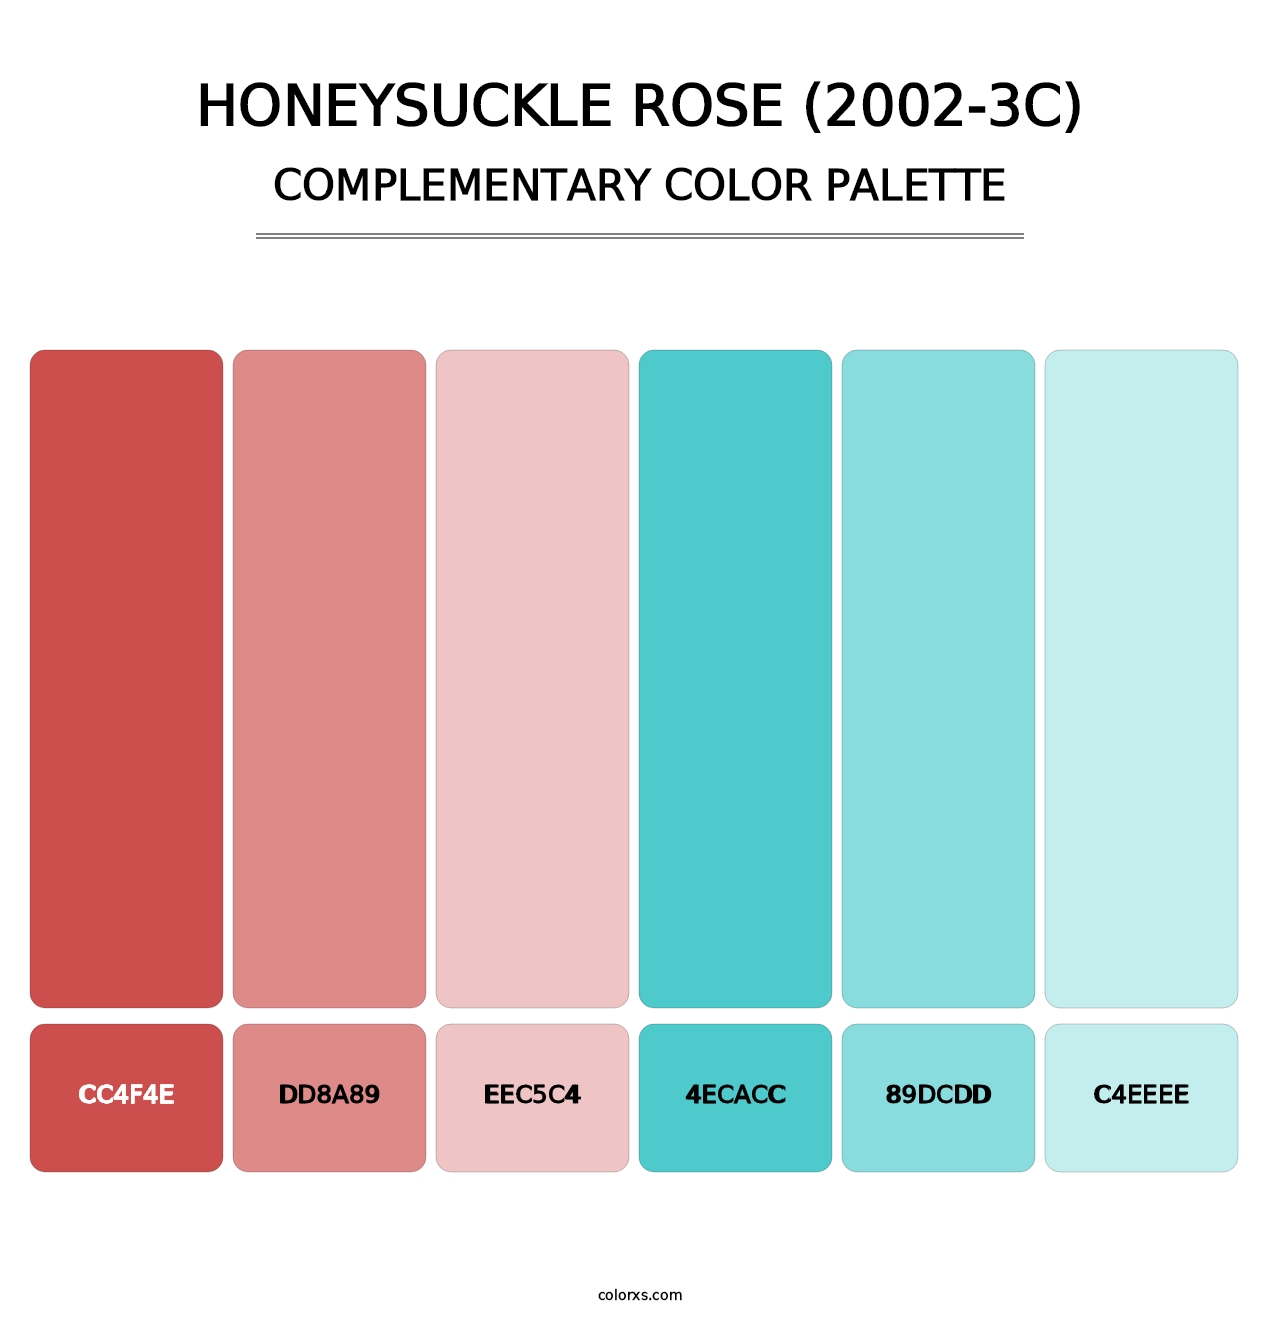 Honeysuckle Rose (2002-3C) - Complementary Color Palette